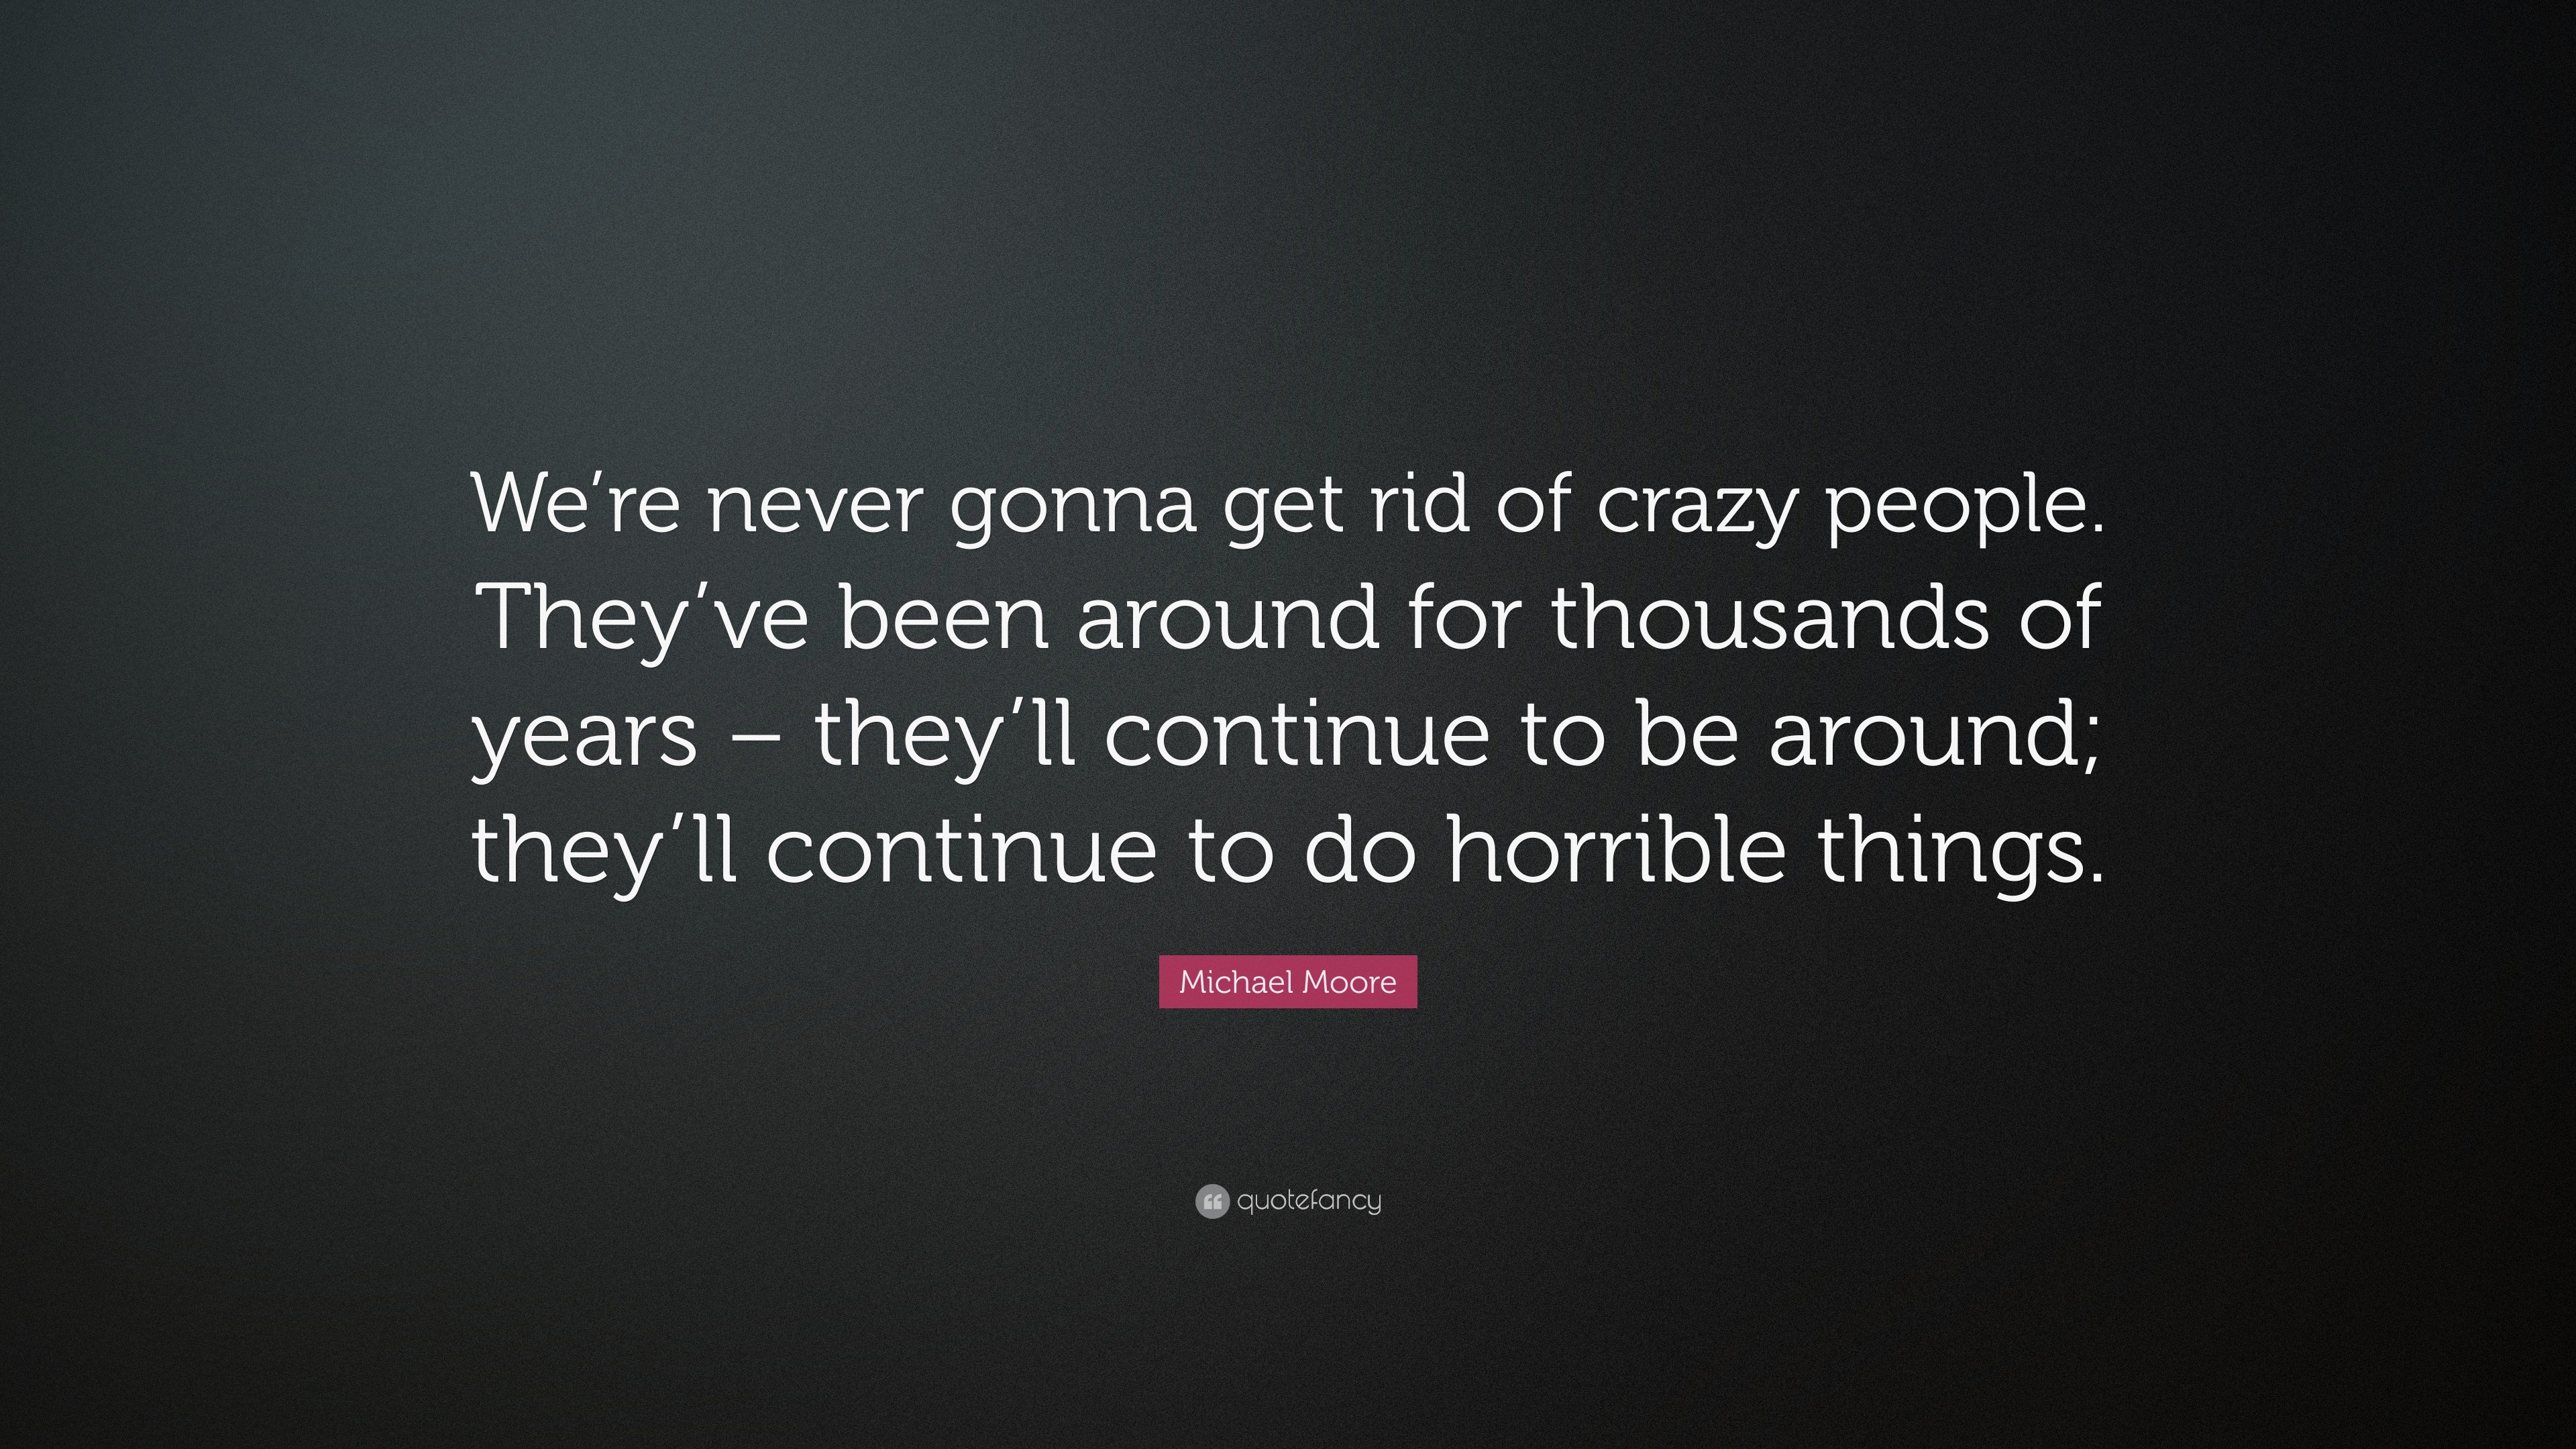 Michael Moore Quote: “We’re never gonna get rid of crazy people. They ...